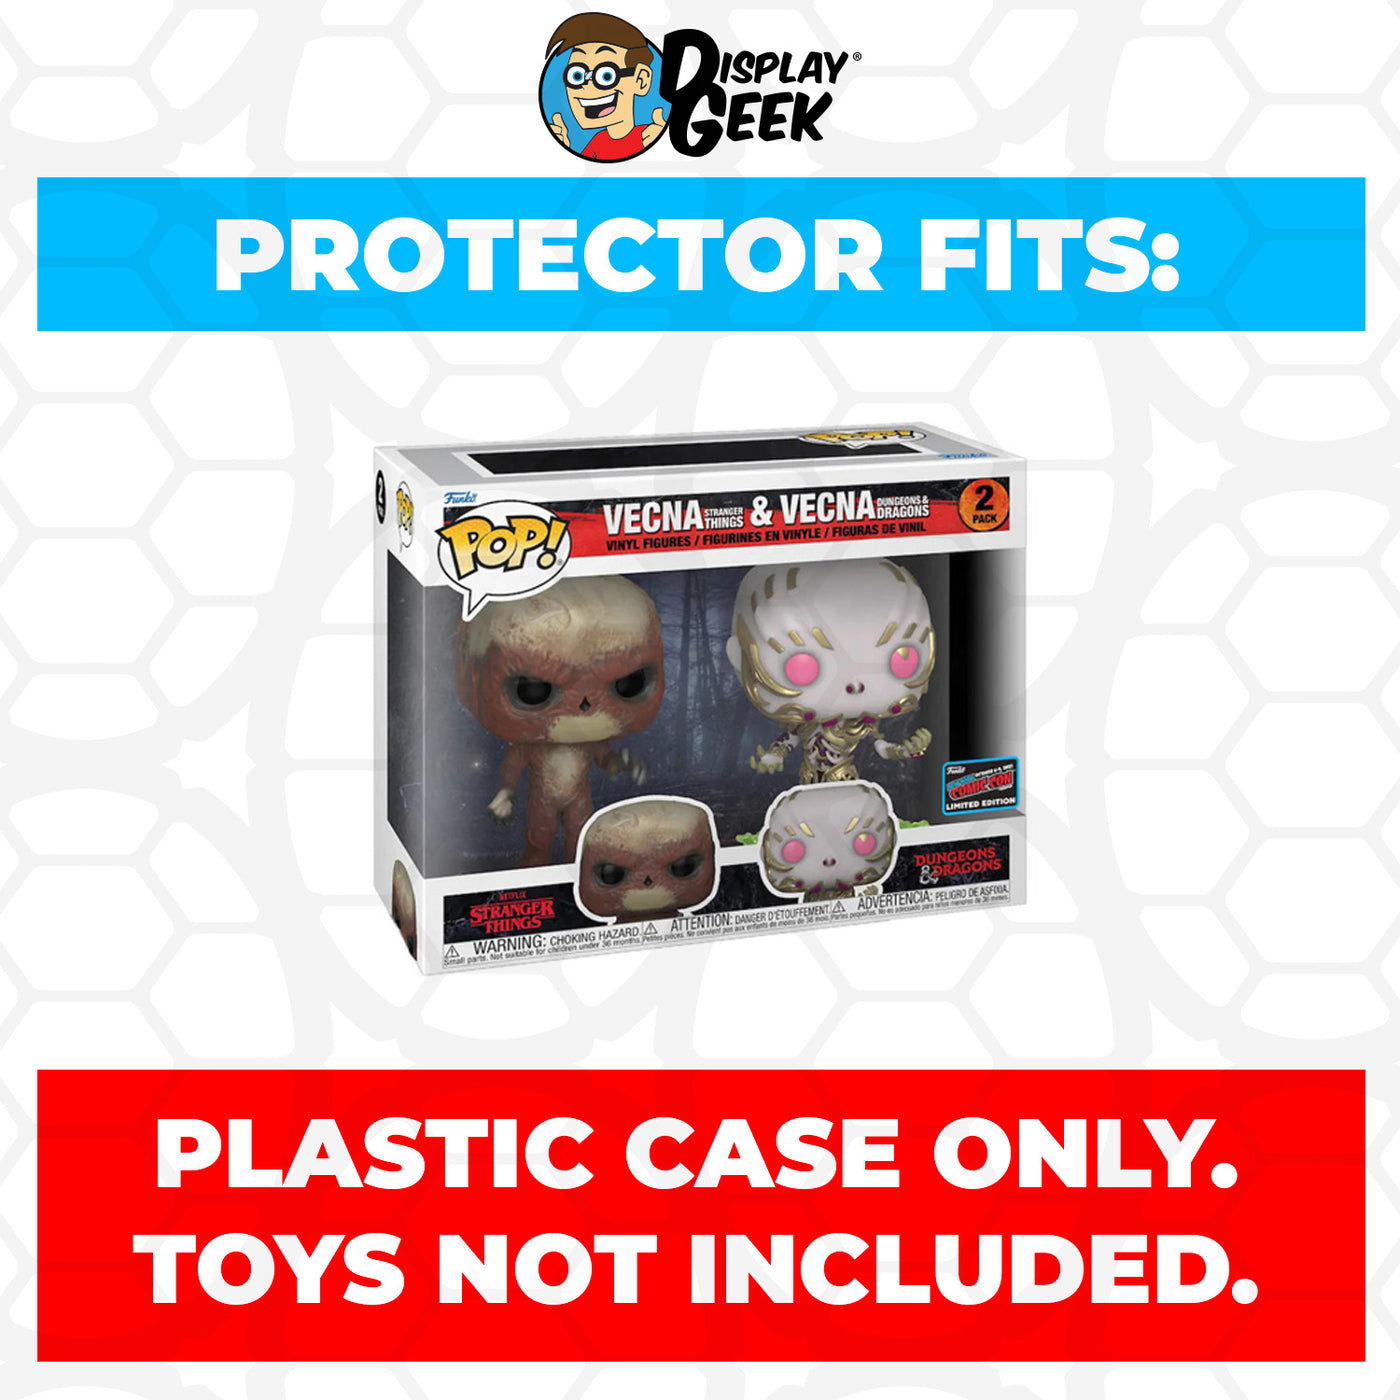 Pop Protector for 2 Pack Vecna Stranger Things & Vecna D&D Funko Pop on The Protector Guide App by Display Geek